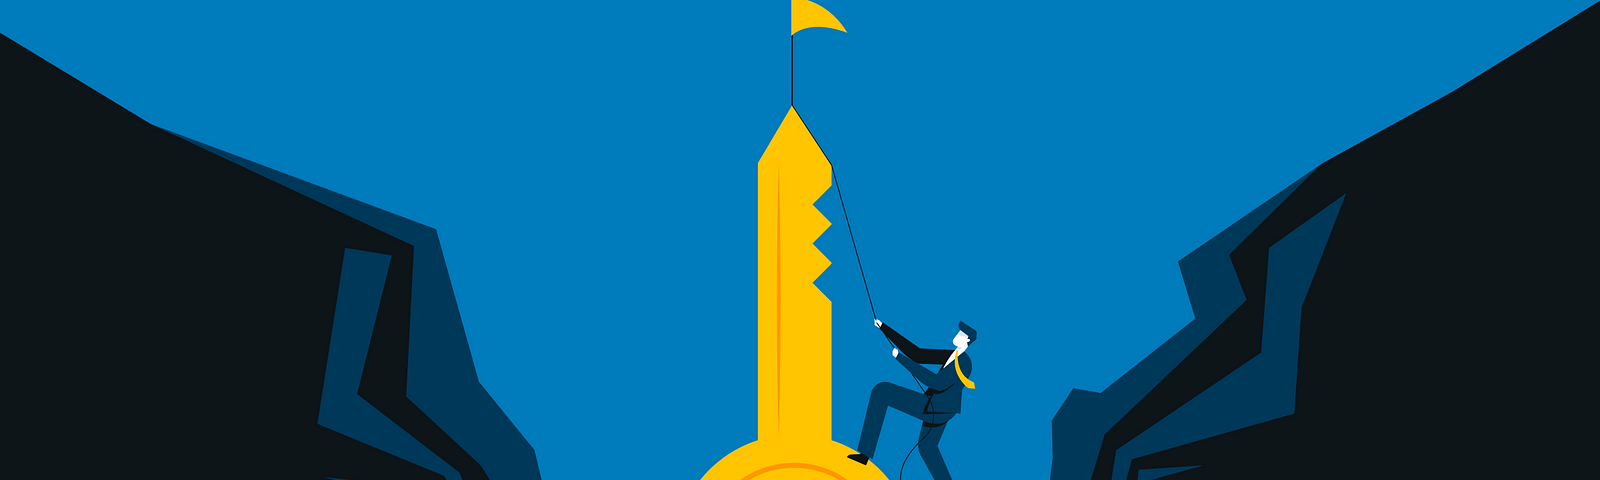 The illustrated man climbing the gigantic golden key with the flag on top.